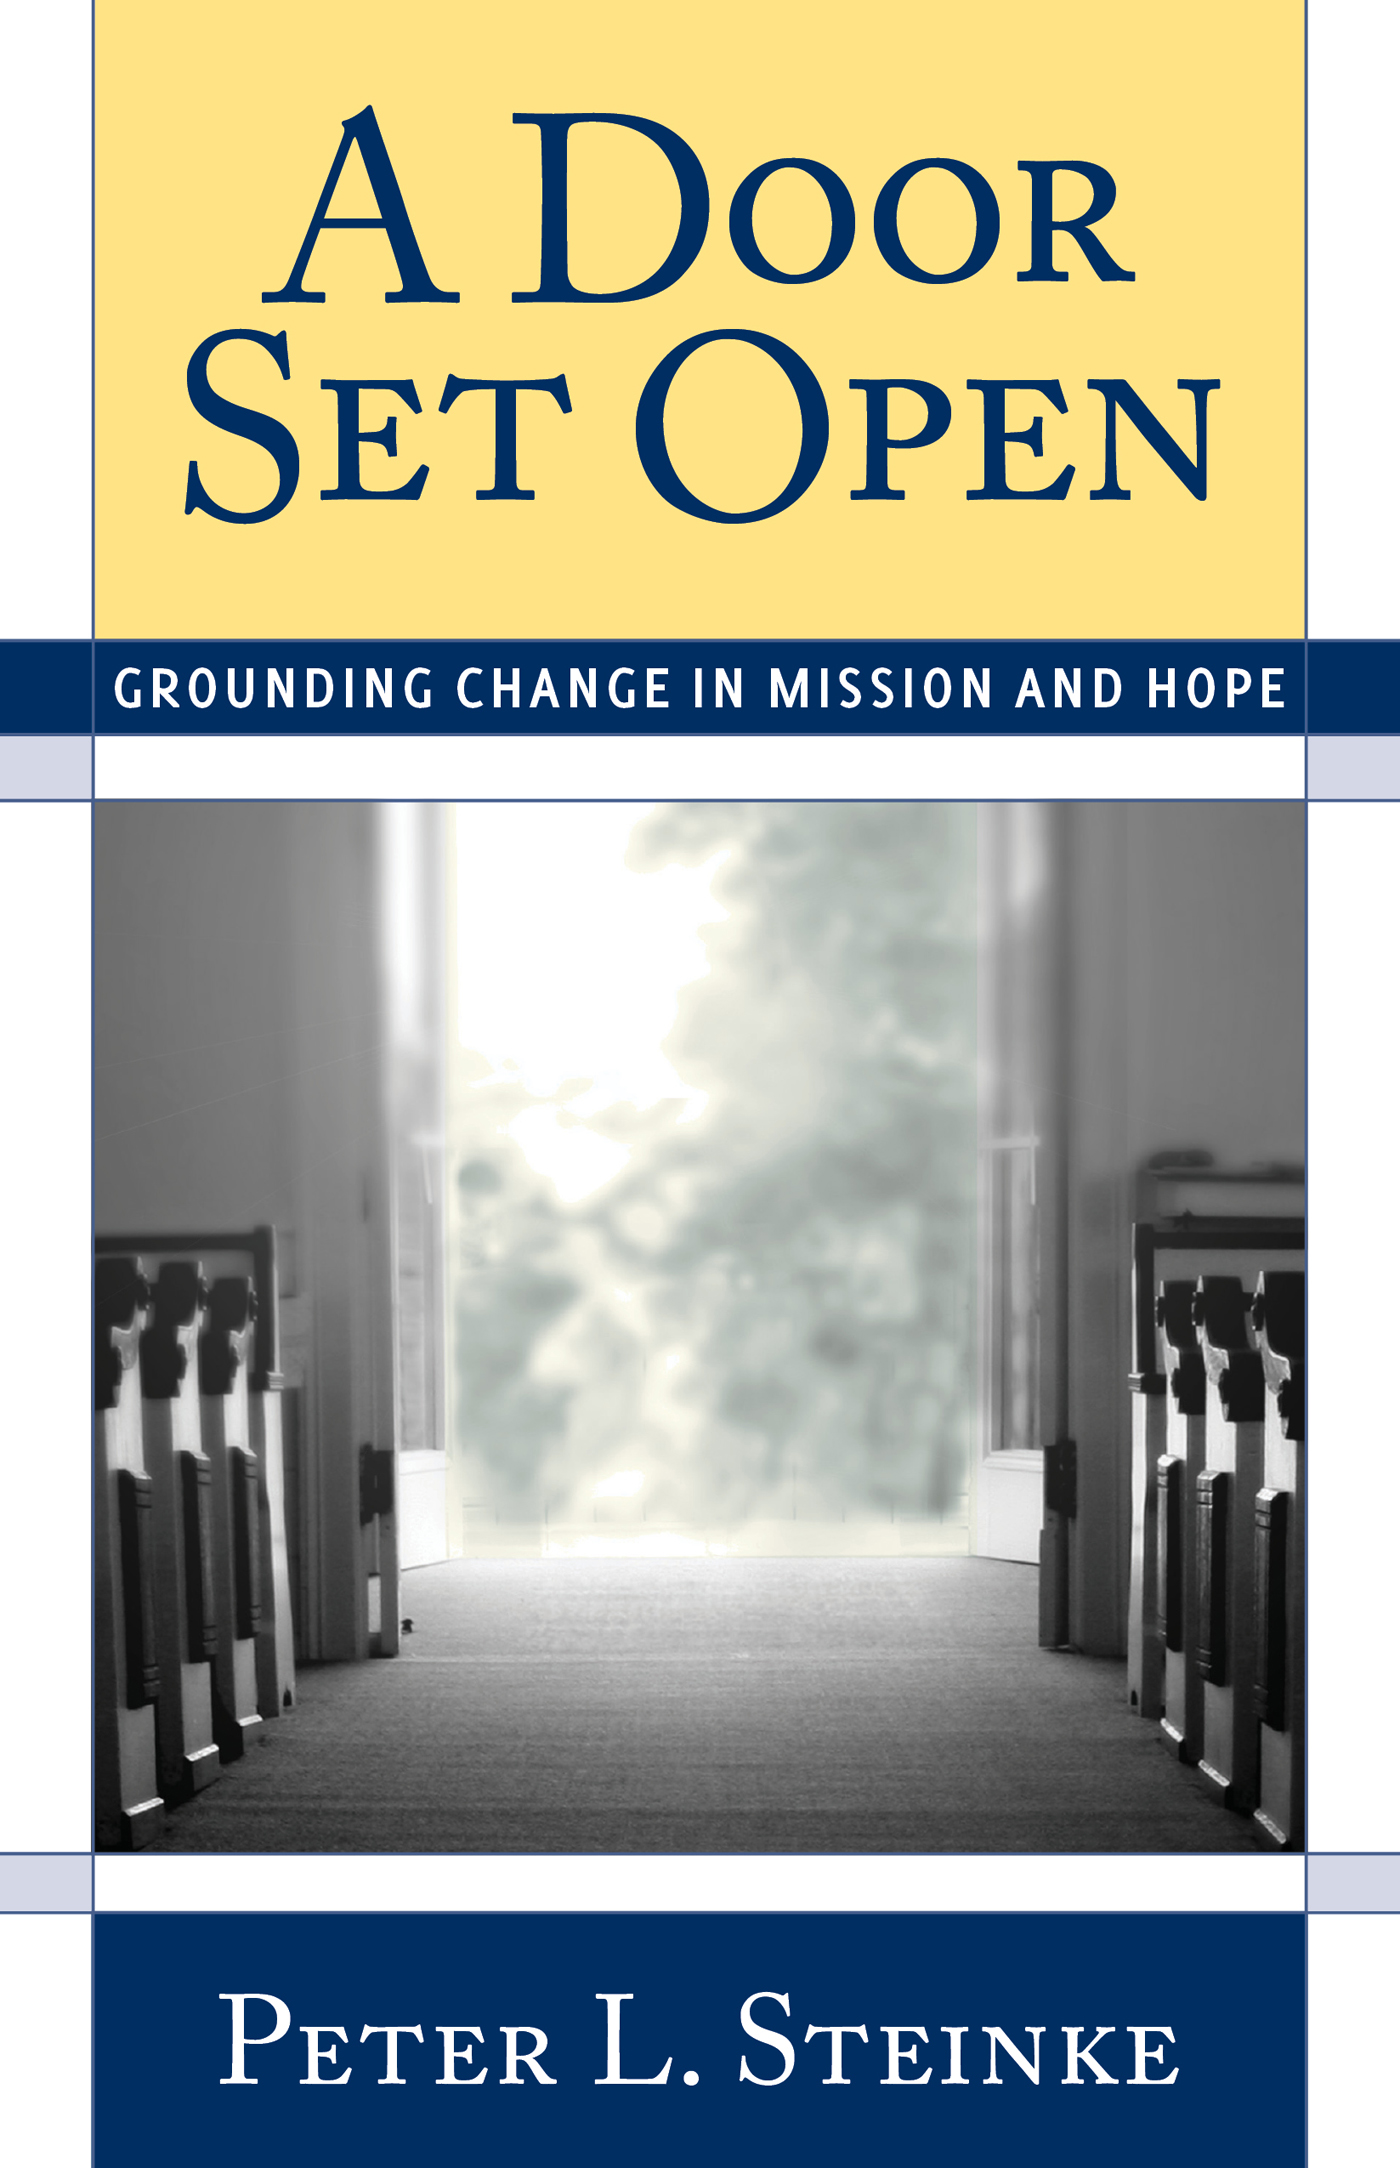 A Door Set Open: Grounding Change in Mission and Hope